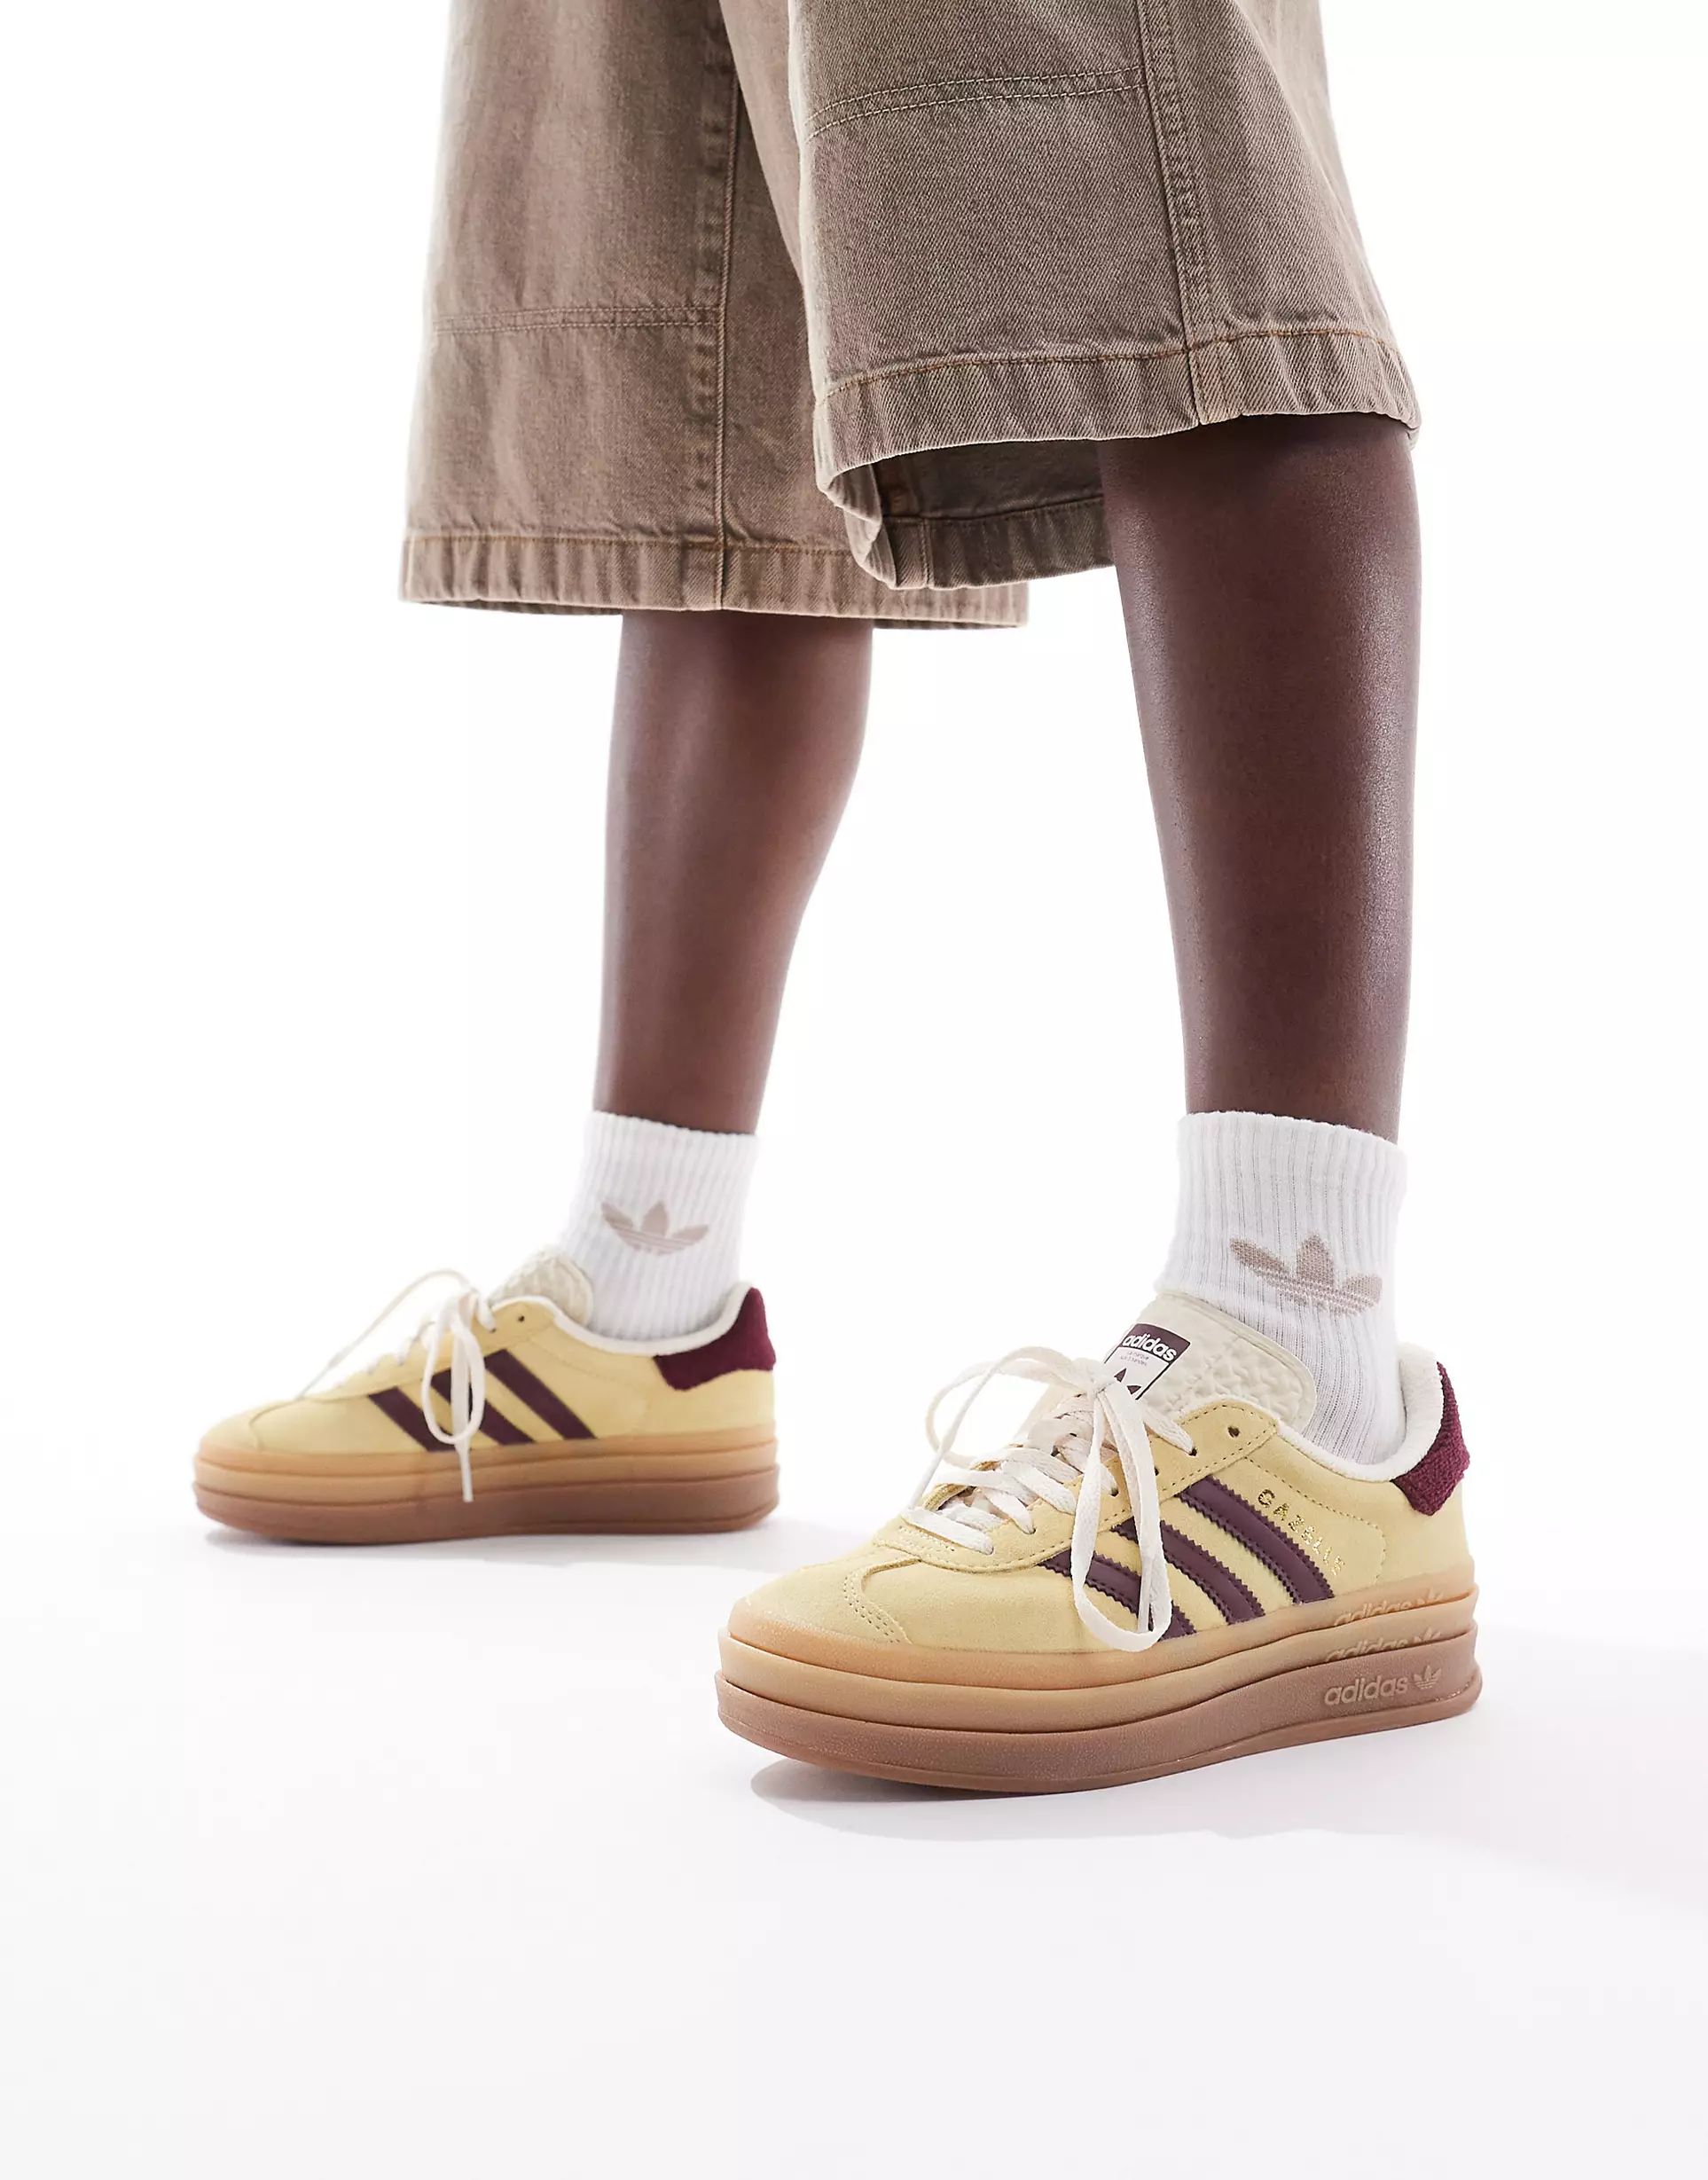 adidas Originals Gazelle Bold sneakers with gum sole in yellow and burgundy | ASOS (Global)